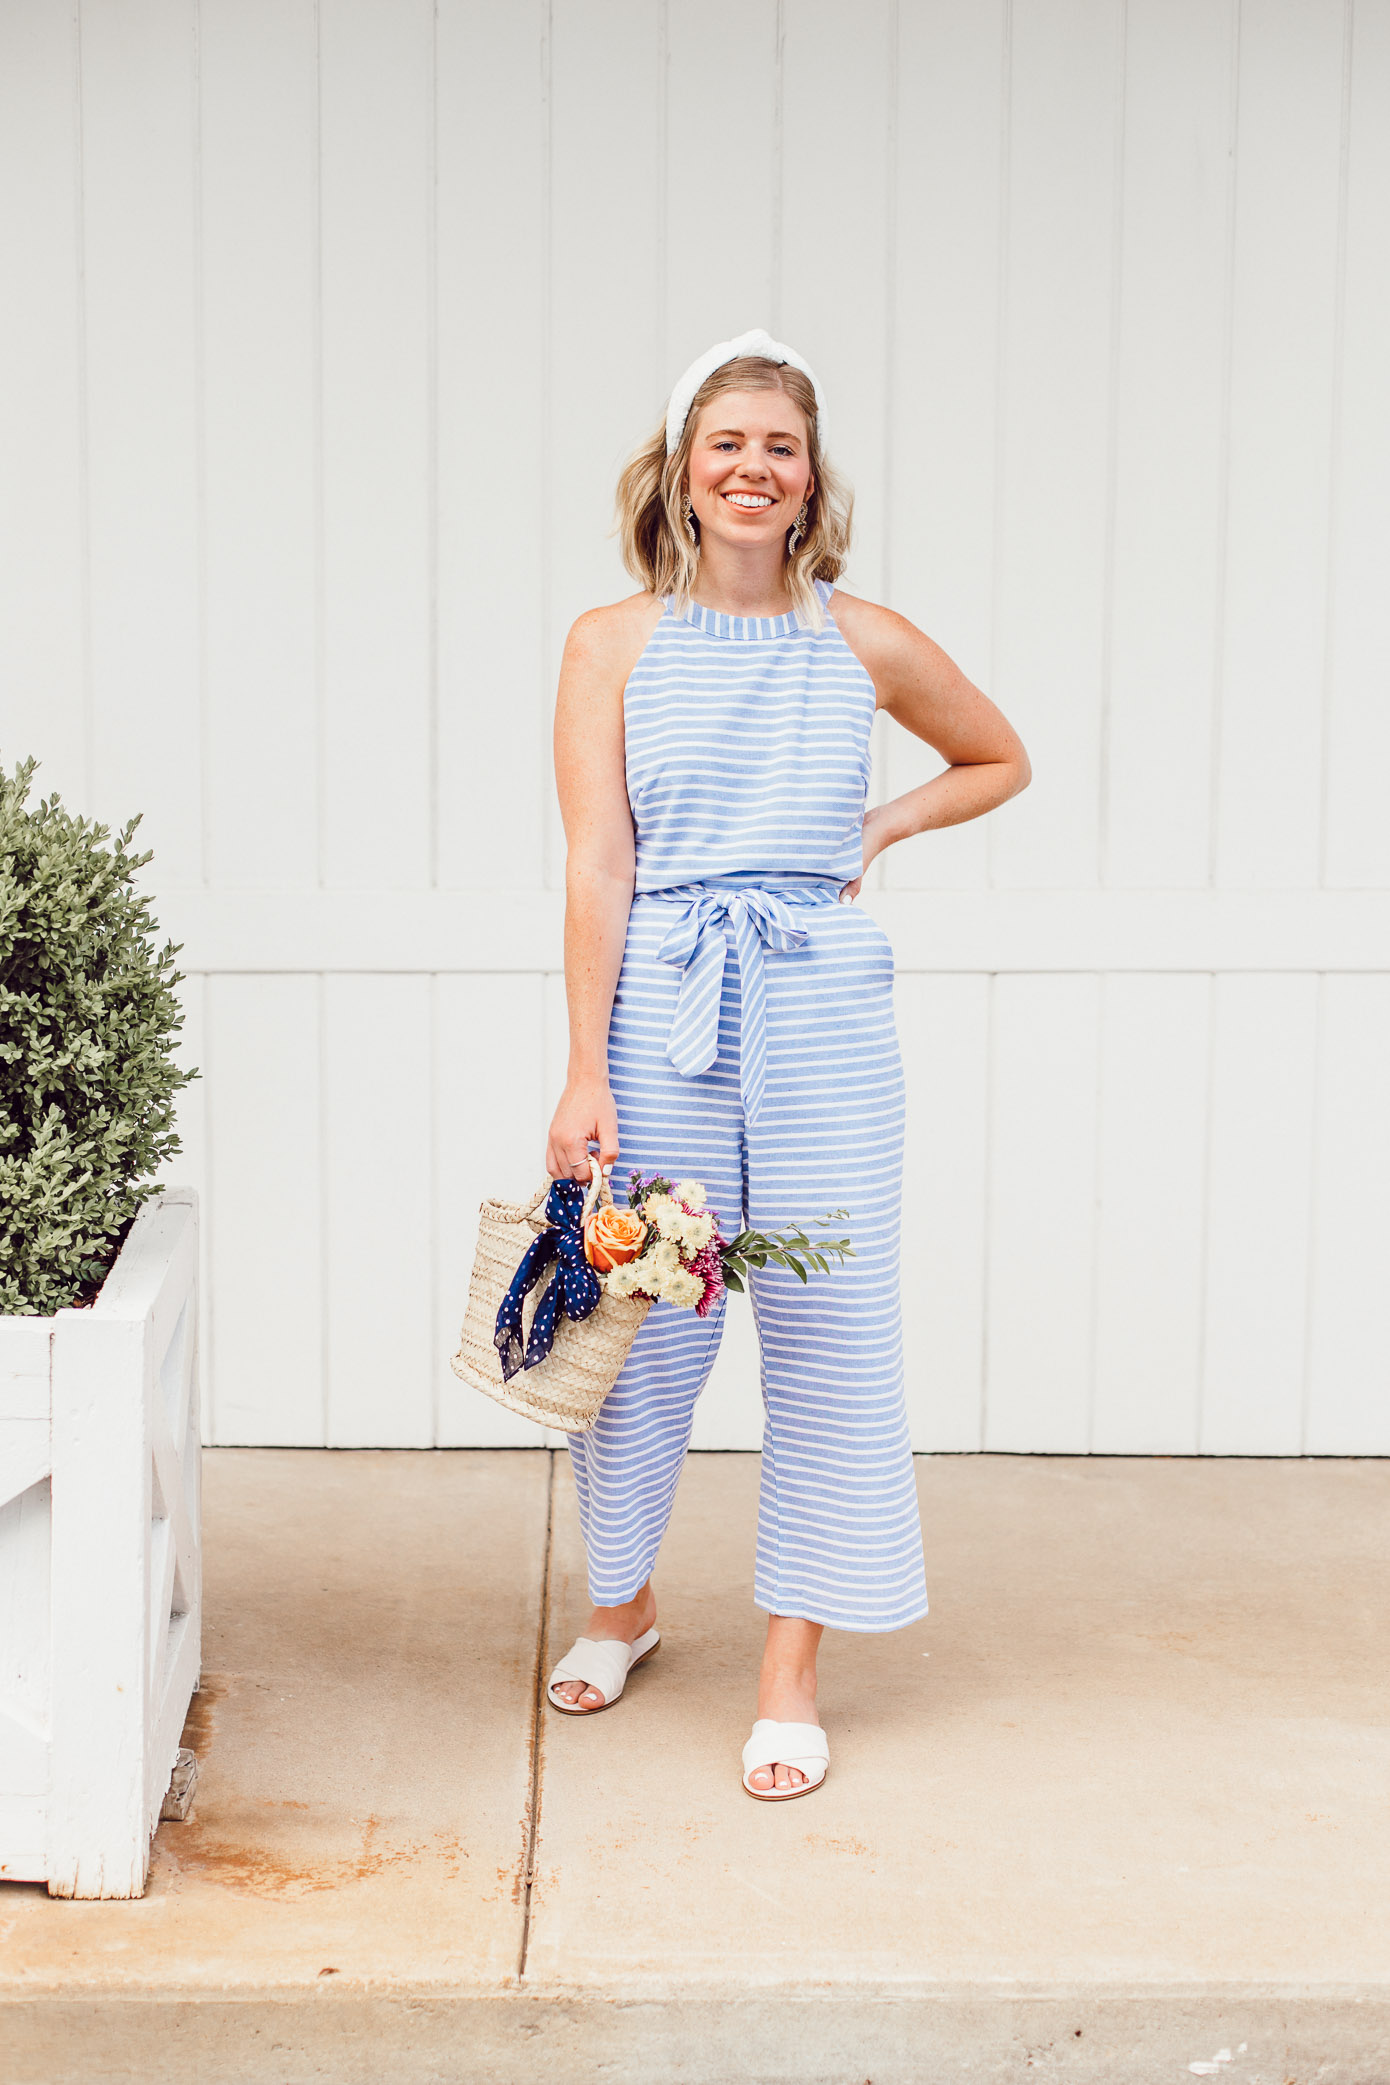 Louella Reese June 2019 Recap | Blue Striped Jumpsuit under $25, White Eyelet Headband, Mini Straw Tote, Tote of Flowers, White Slide Sandals | Louella Reese